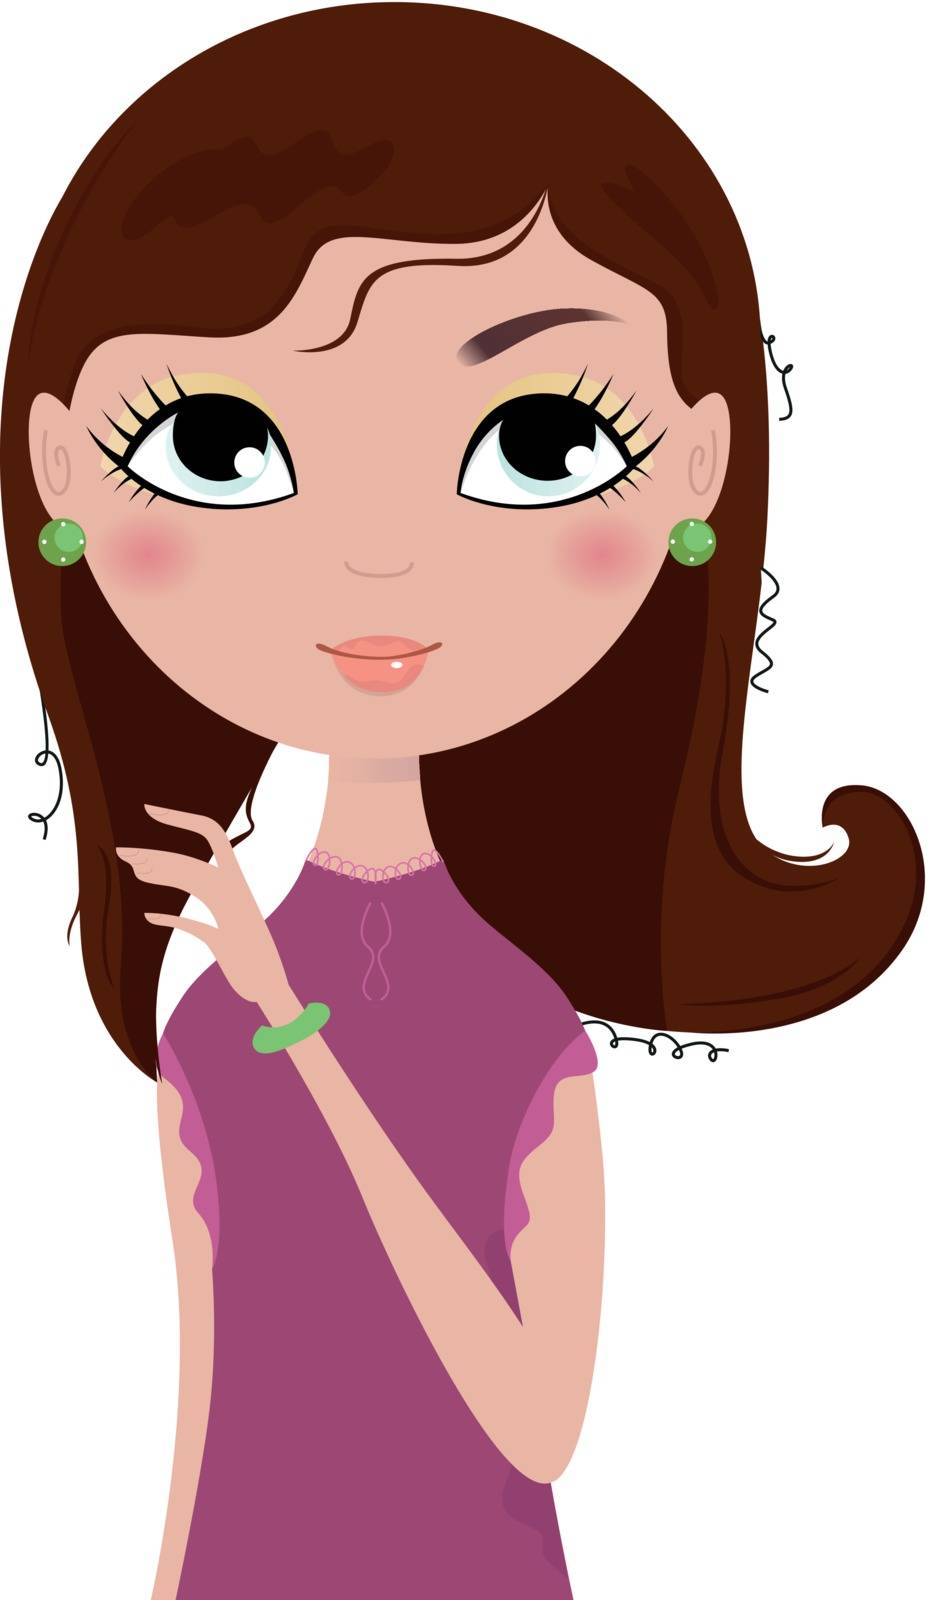 Creative girl perfect for marketing, magazines and corporate identity. Unique hand-drawn Illustration, stylish fashion look.